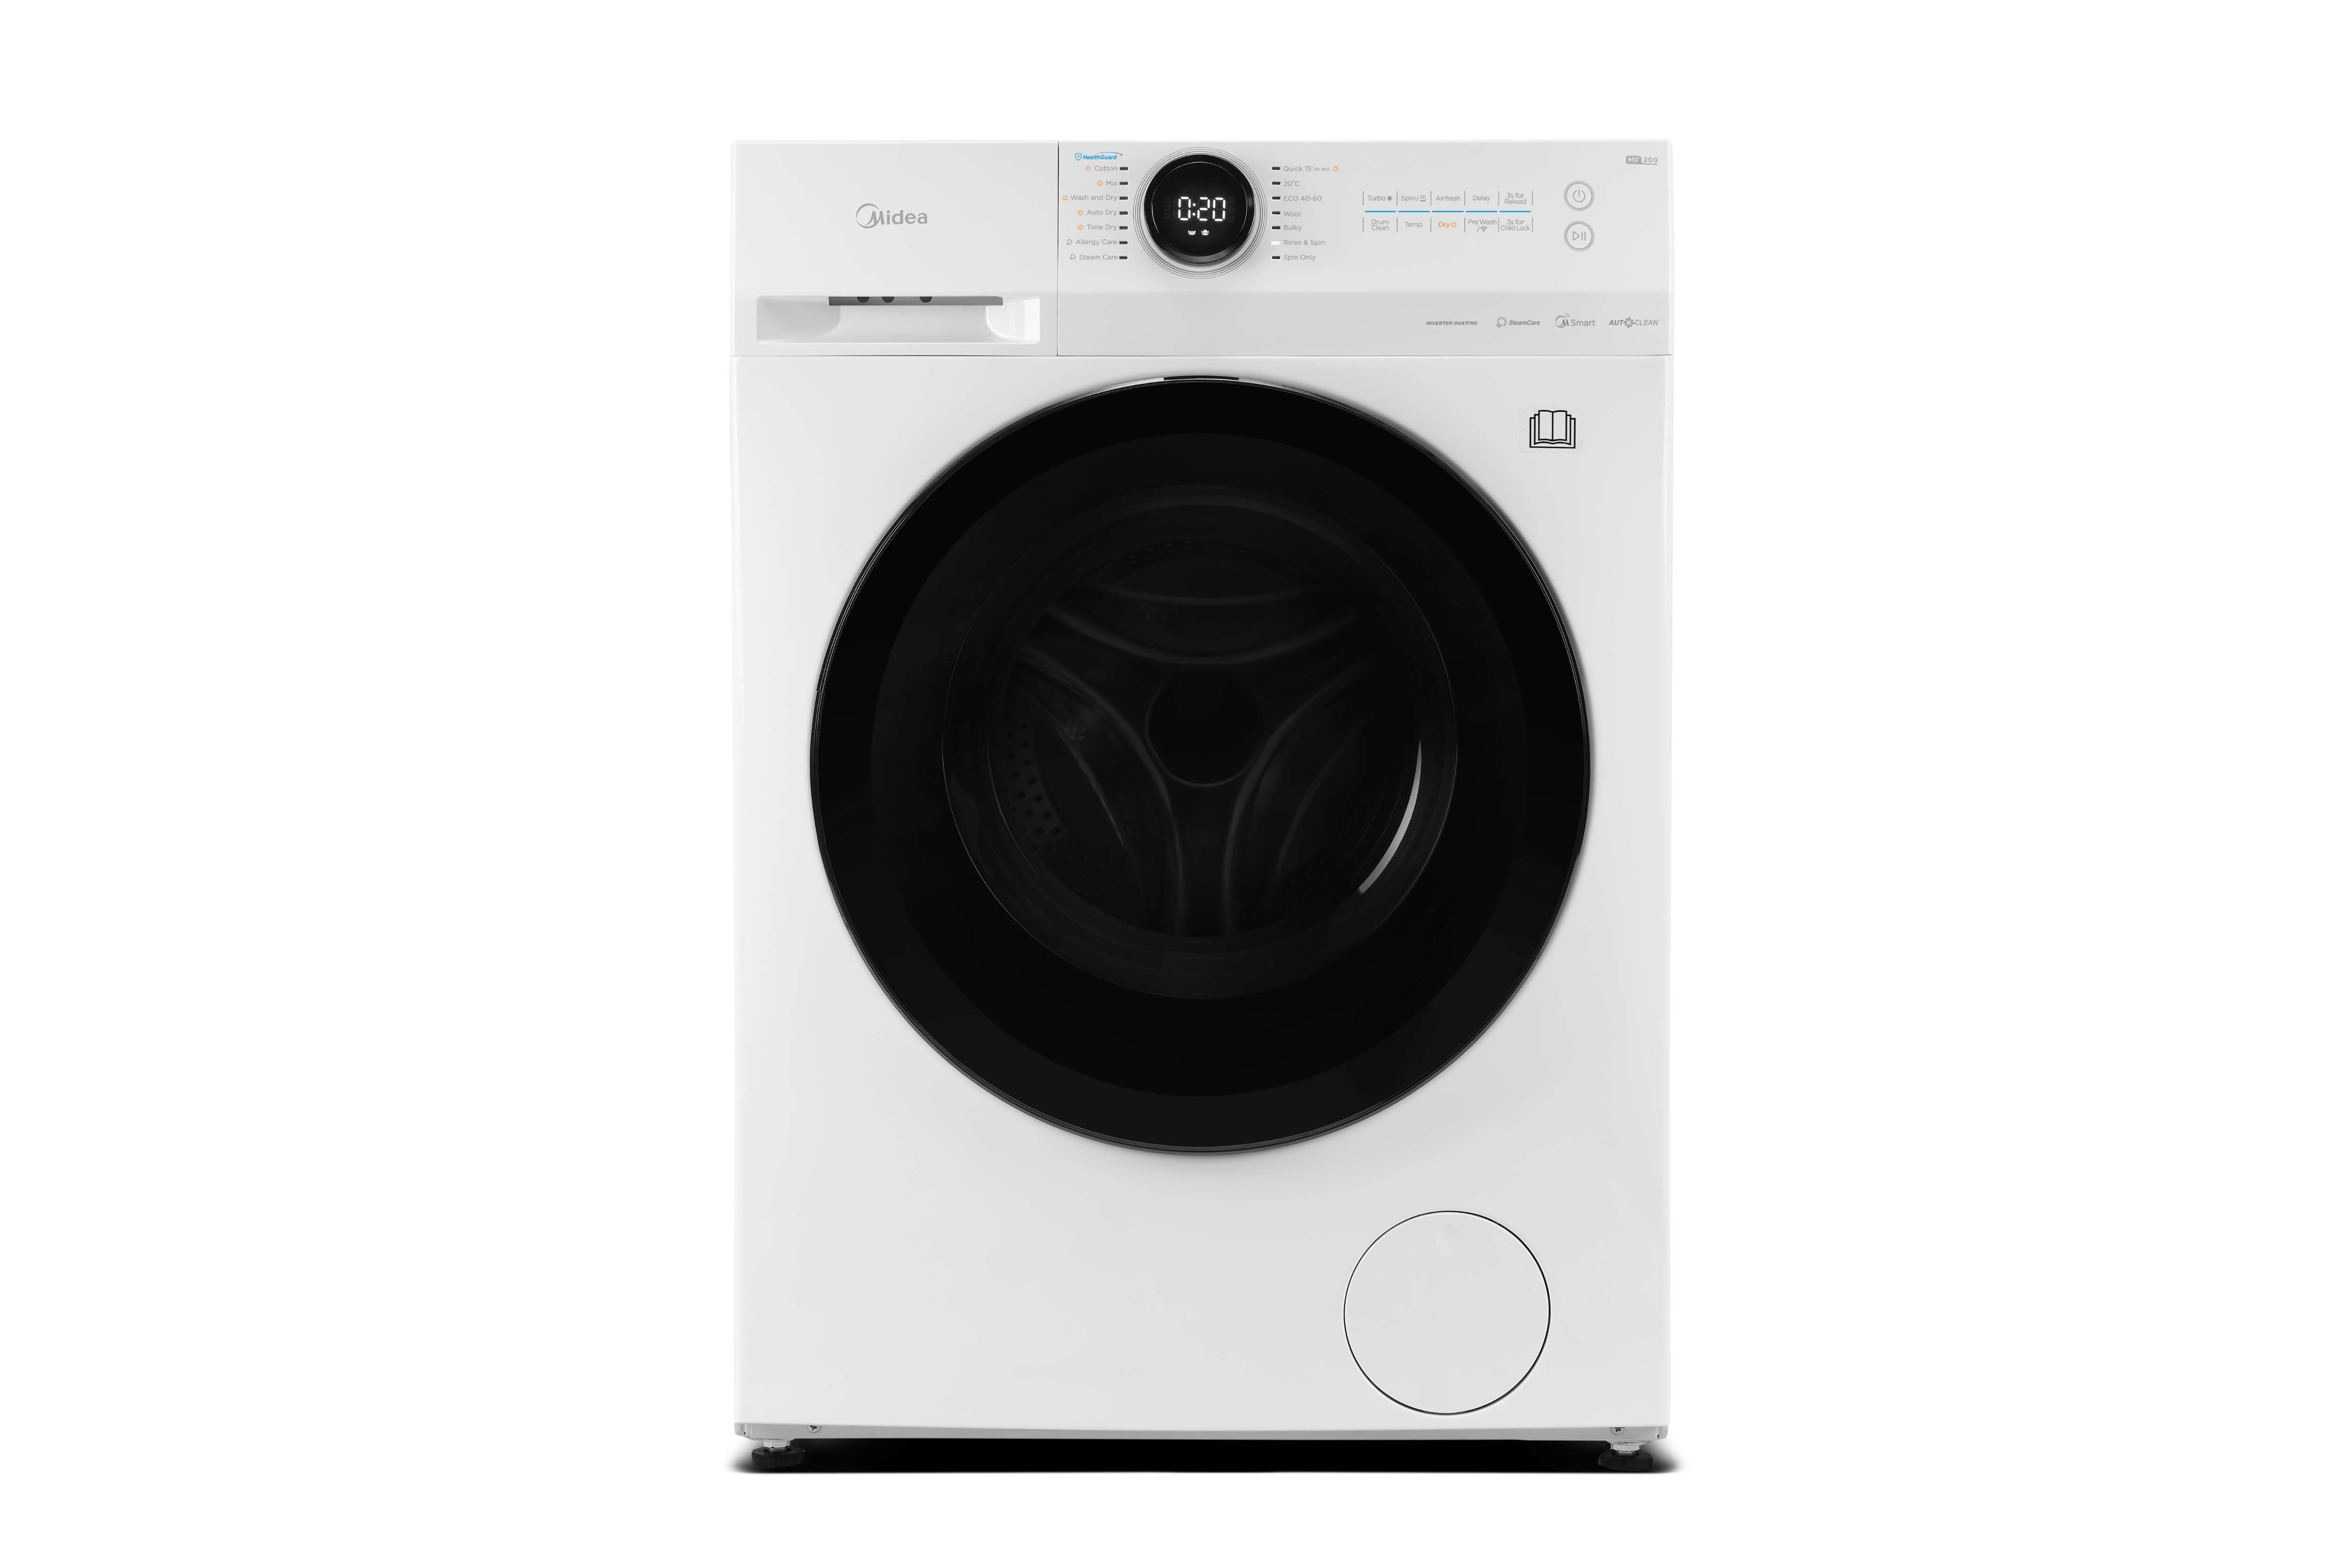 Midea MF20ED80WB Freestanding Washer Dryer, BLDC Motor, Bright LED Display Lunar Dial, Health Guard, Steam, 1400RPM, 8kg/6kg load, APP Control, White [Energy Class A]